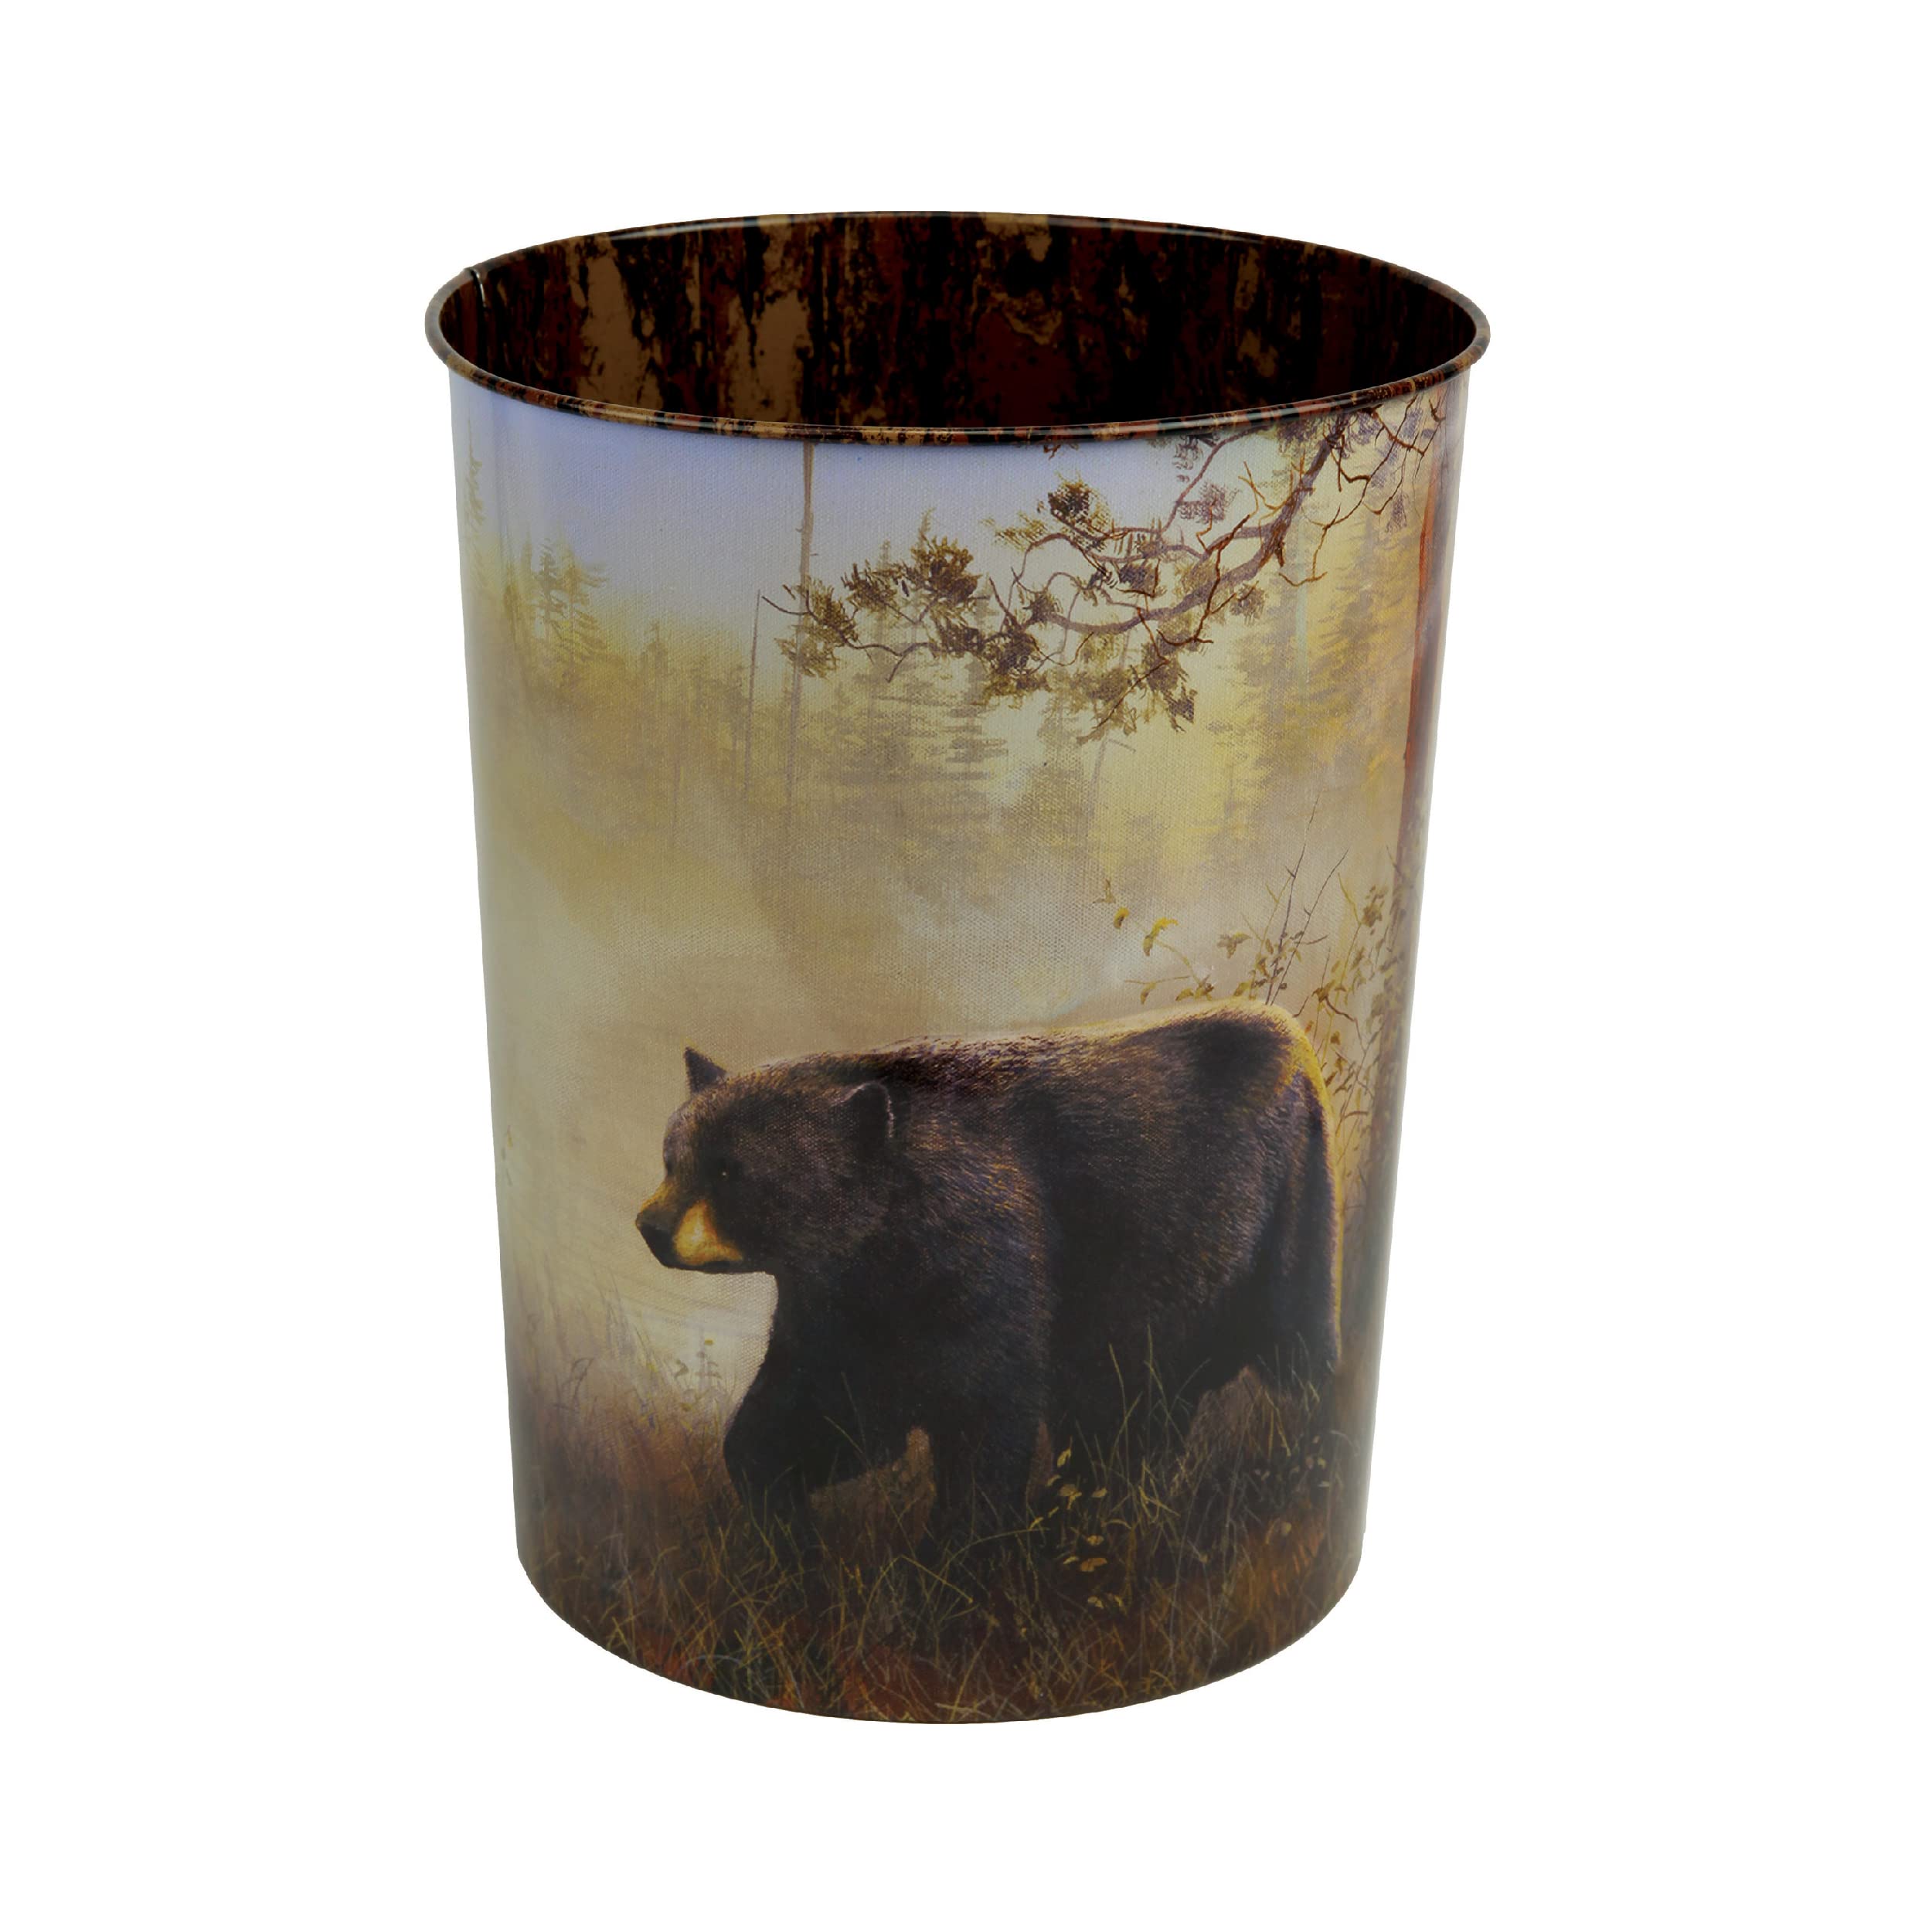 Book Cover Rivers Edge Products Metal Waste Basket, 10.5-Inch Small Trash Can, Novelty Garbage Can for Office, Kitchen, Bathroom, or Bedroom, Nature and Wildlife Home Decor, Jim Hansel Bear